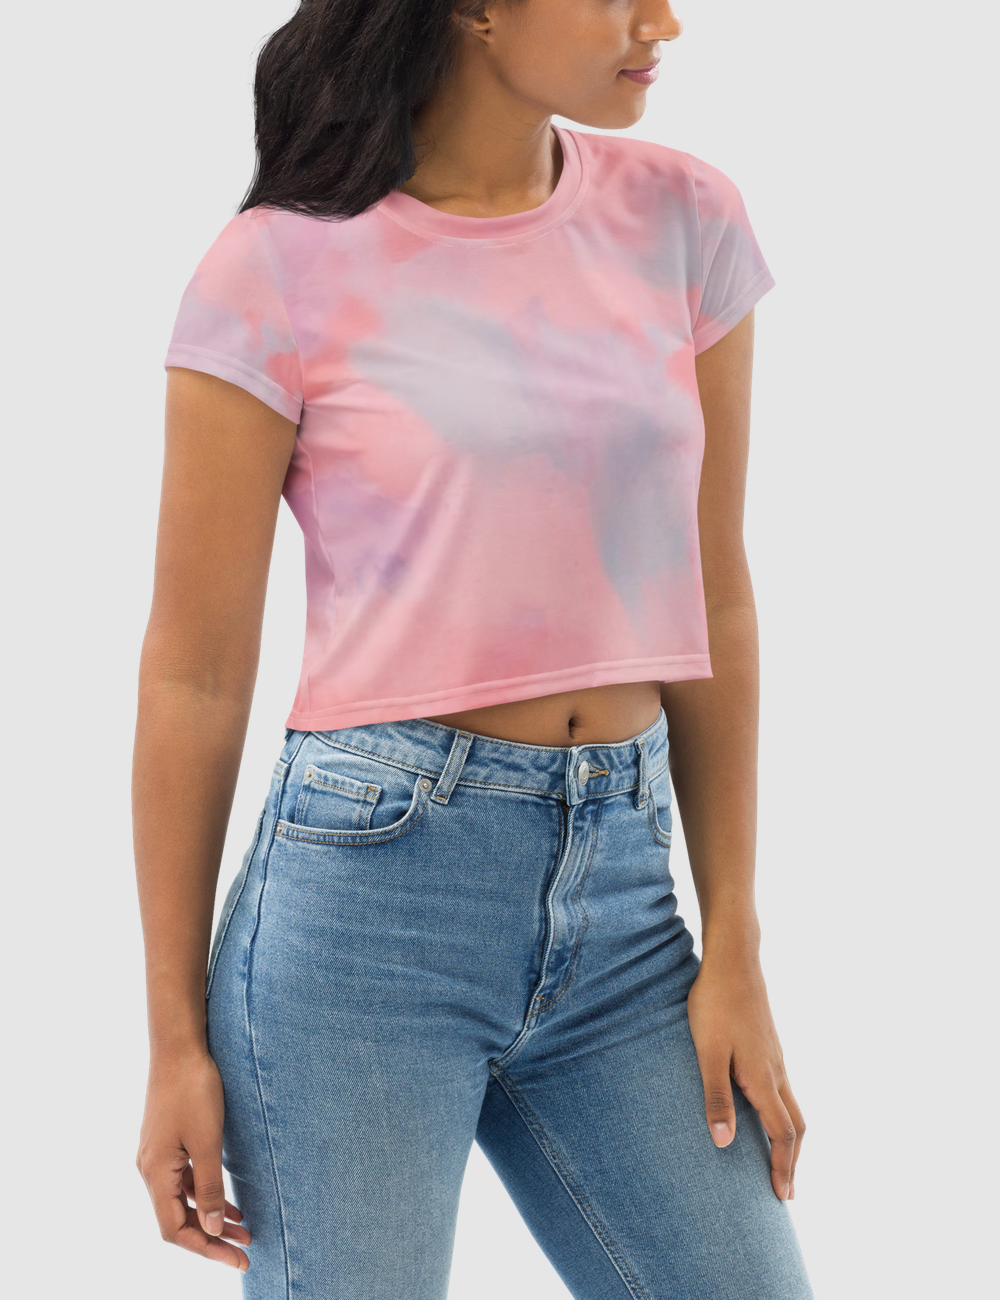 Abstract Light Pink Tie Dye Women's Sublimated Crop Top T-Shirt OniTakai